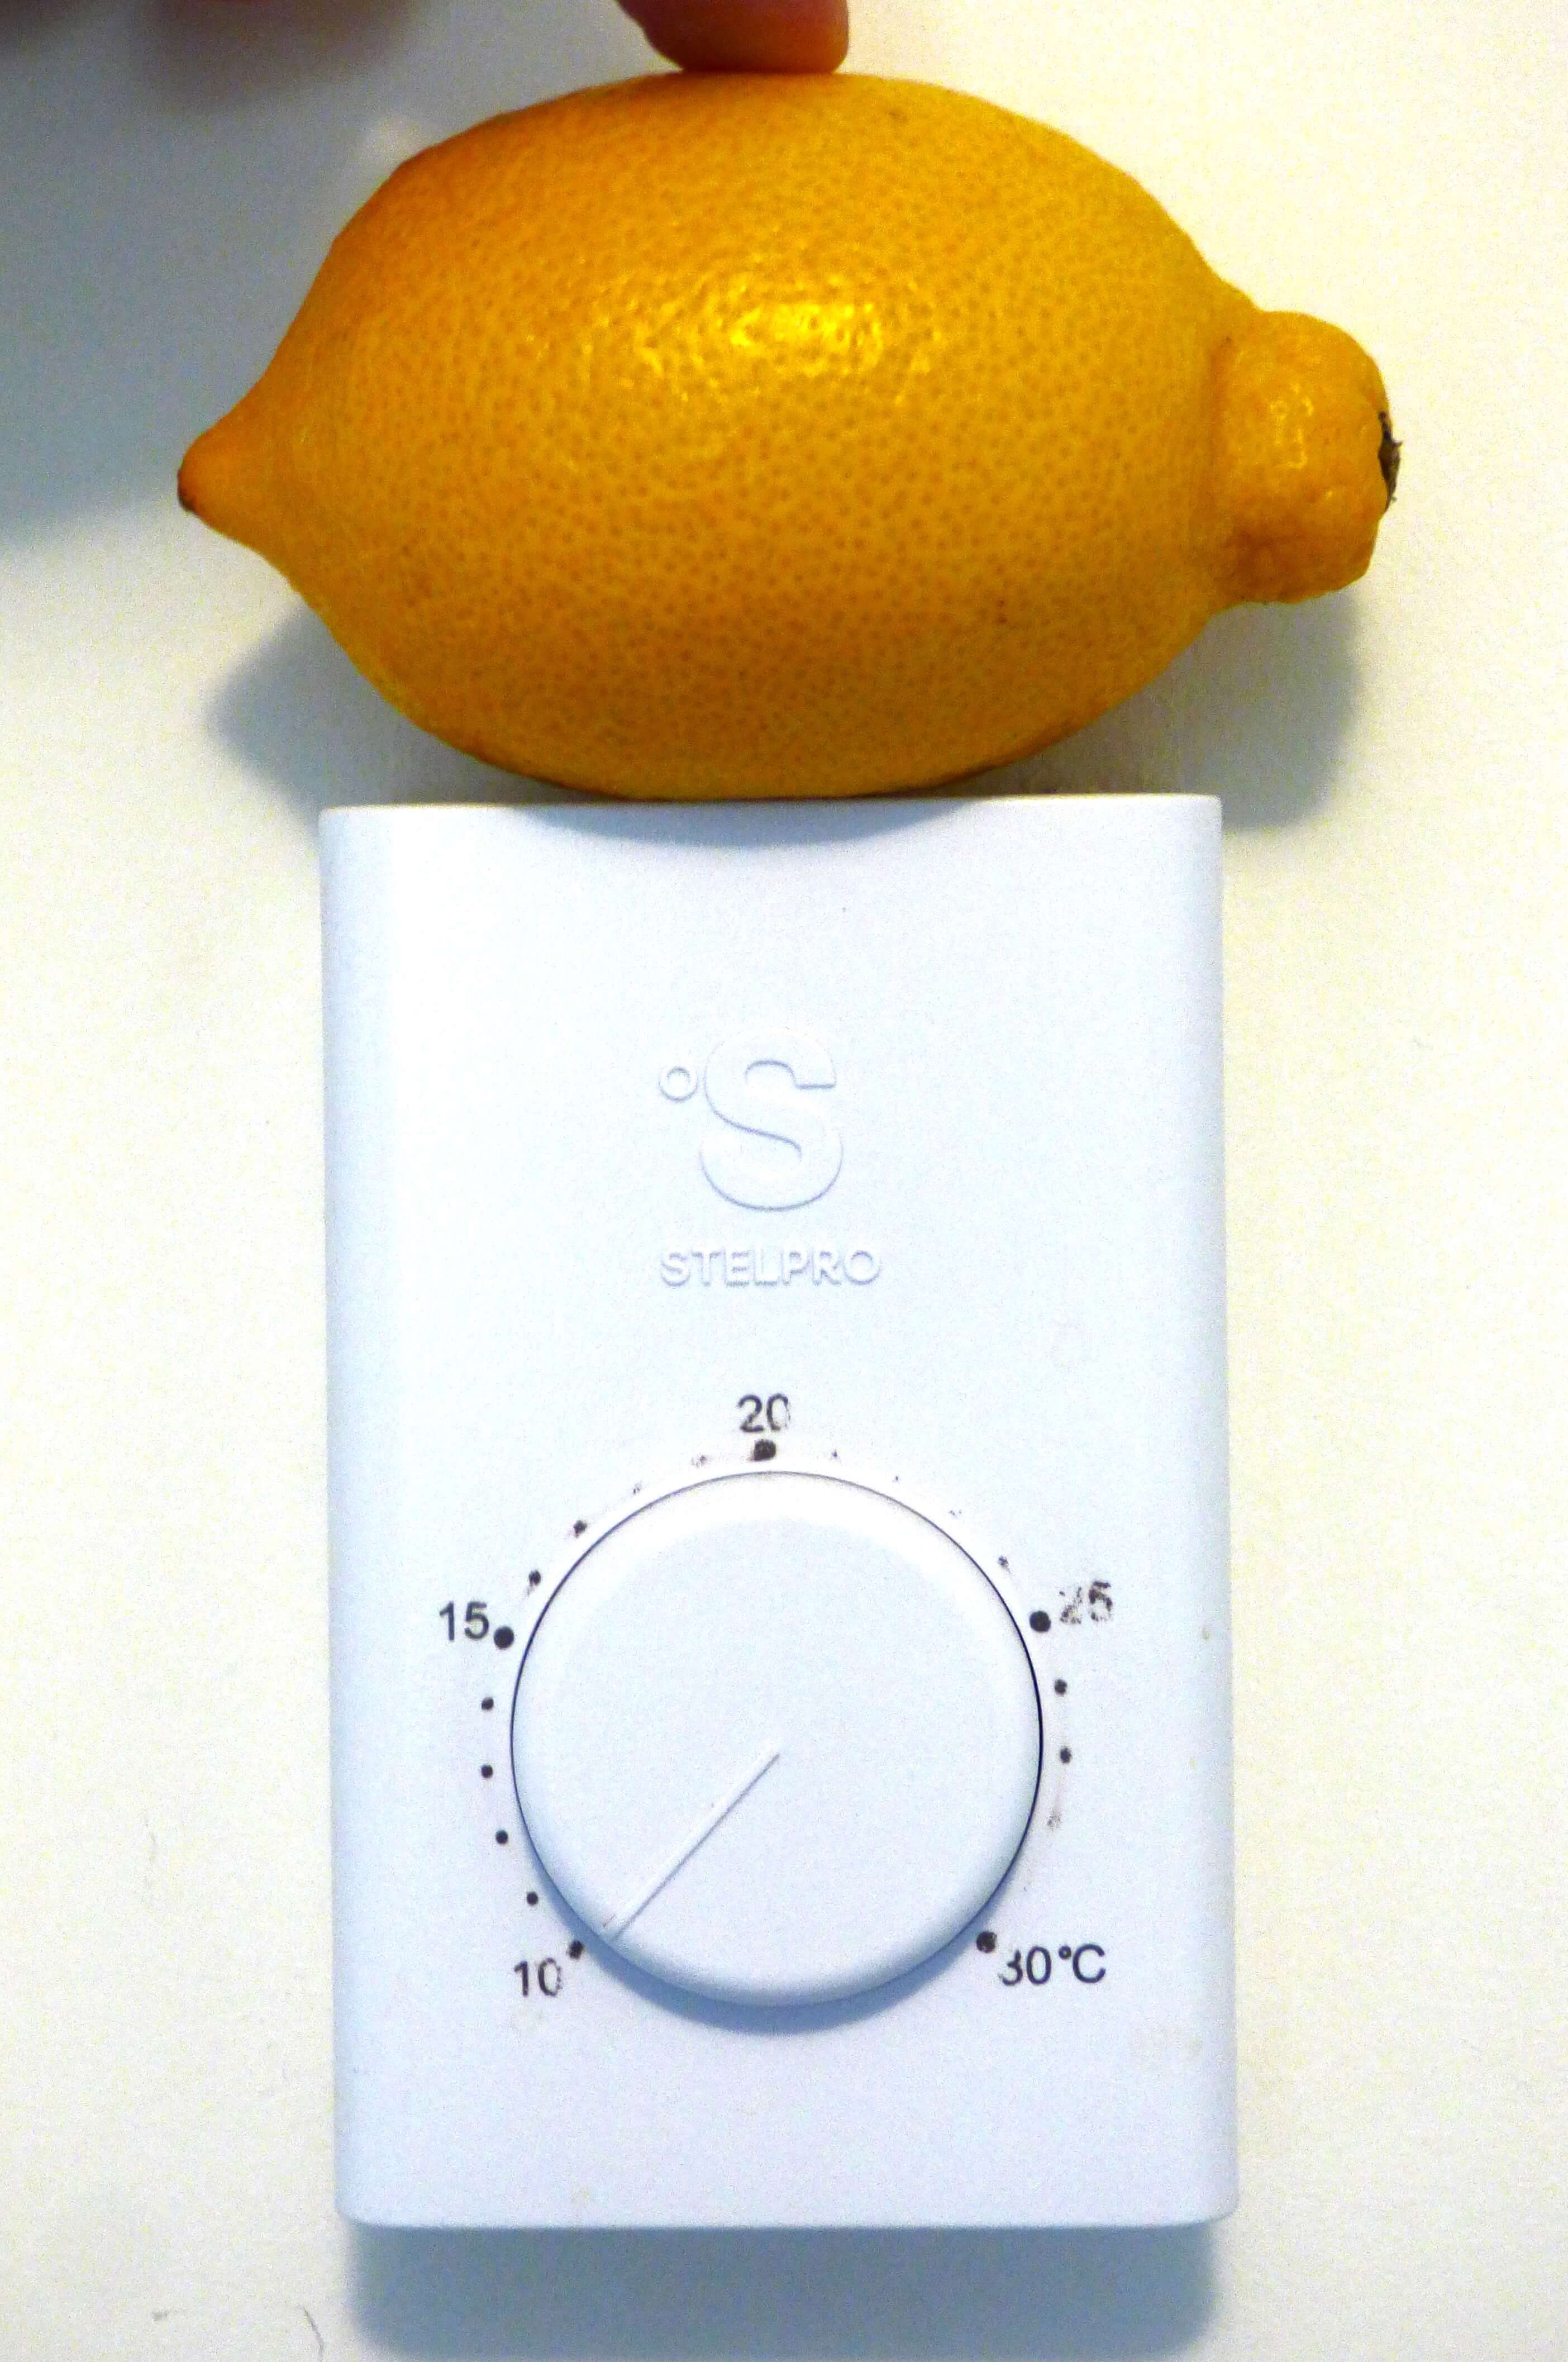 Lemon on top of thermostat